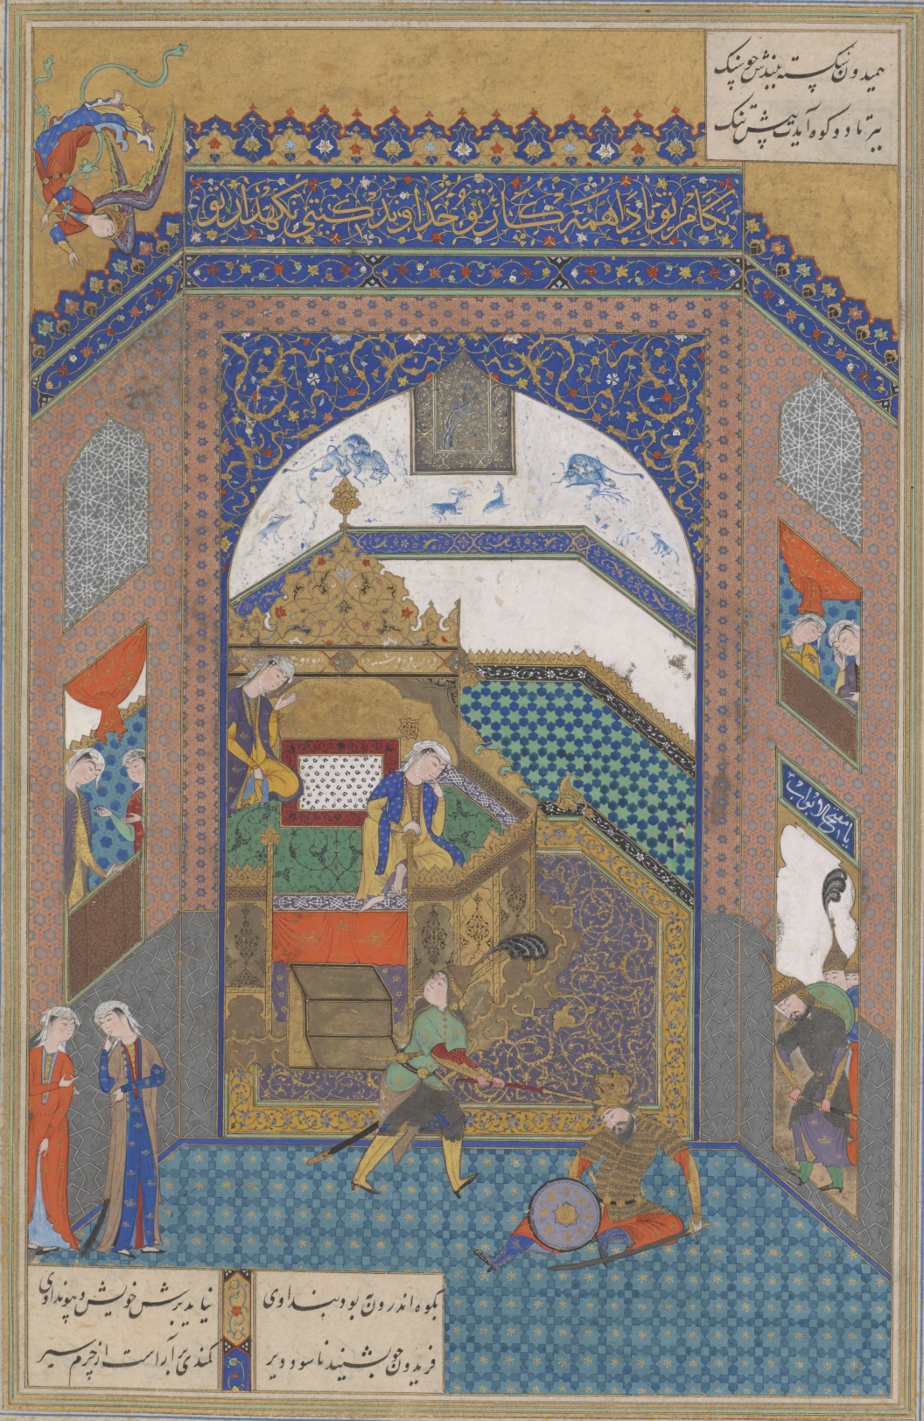 Between Word and Image: Safavid Visual Culture in the 16th and 17th century